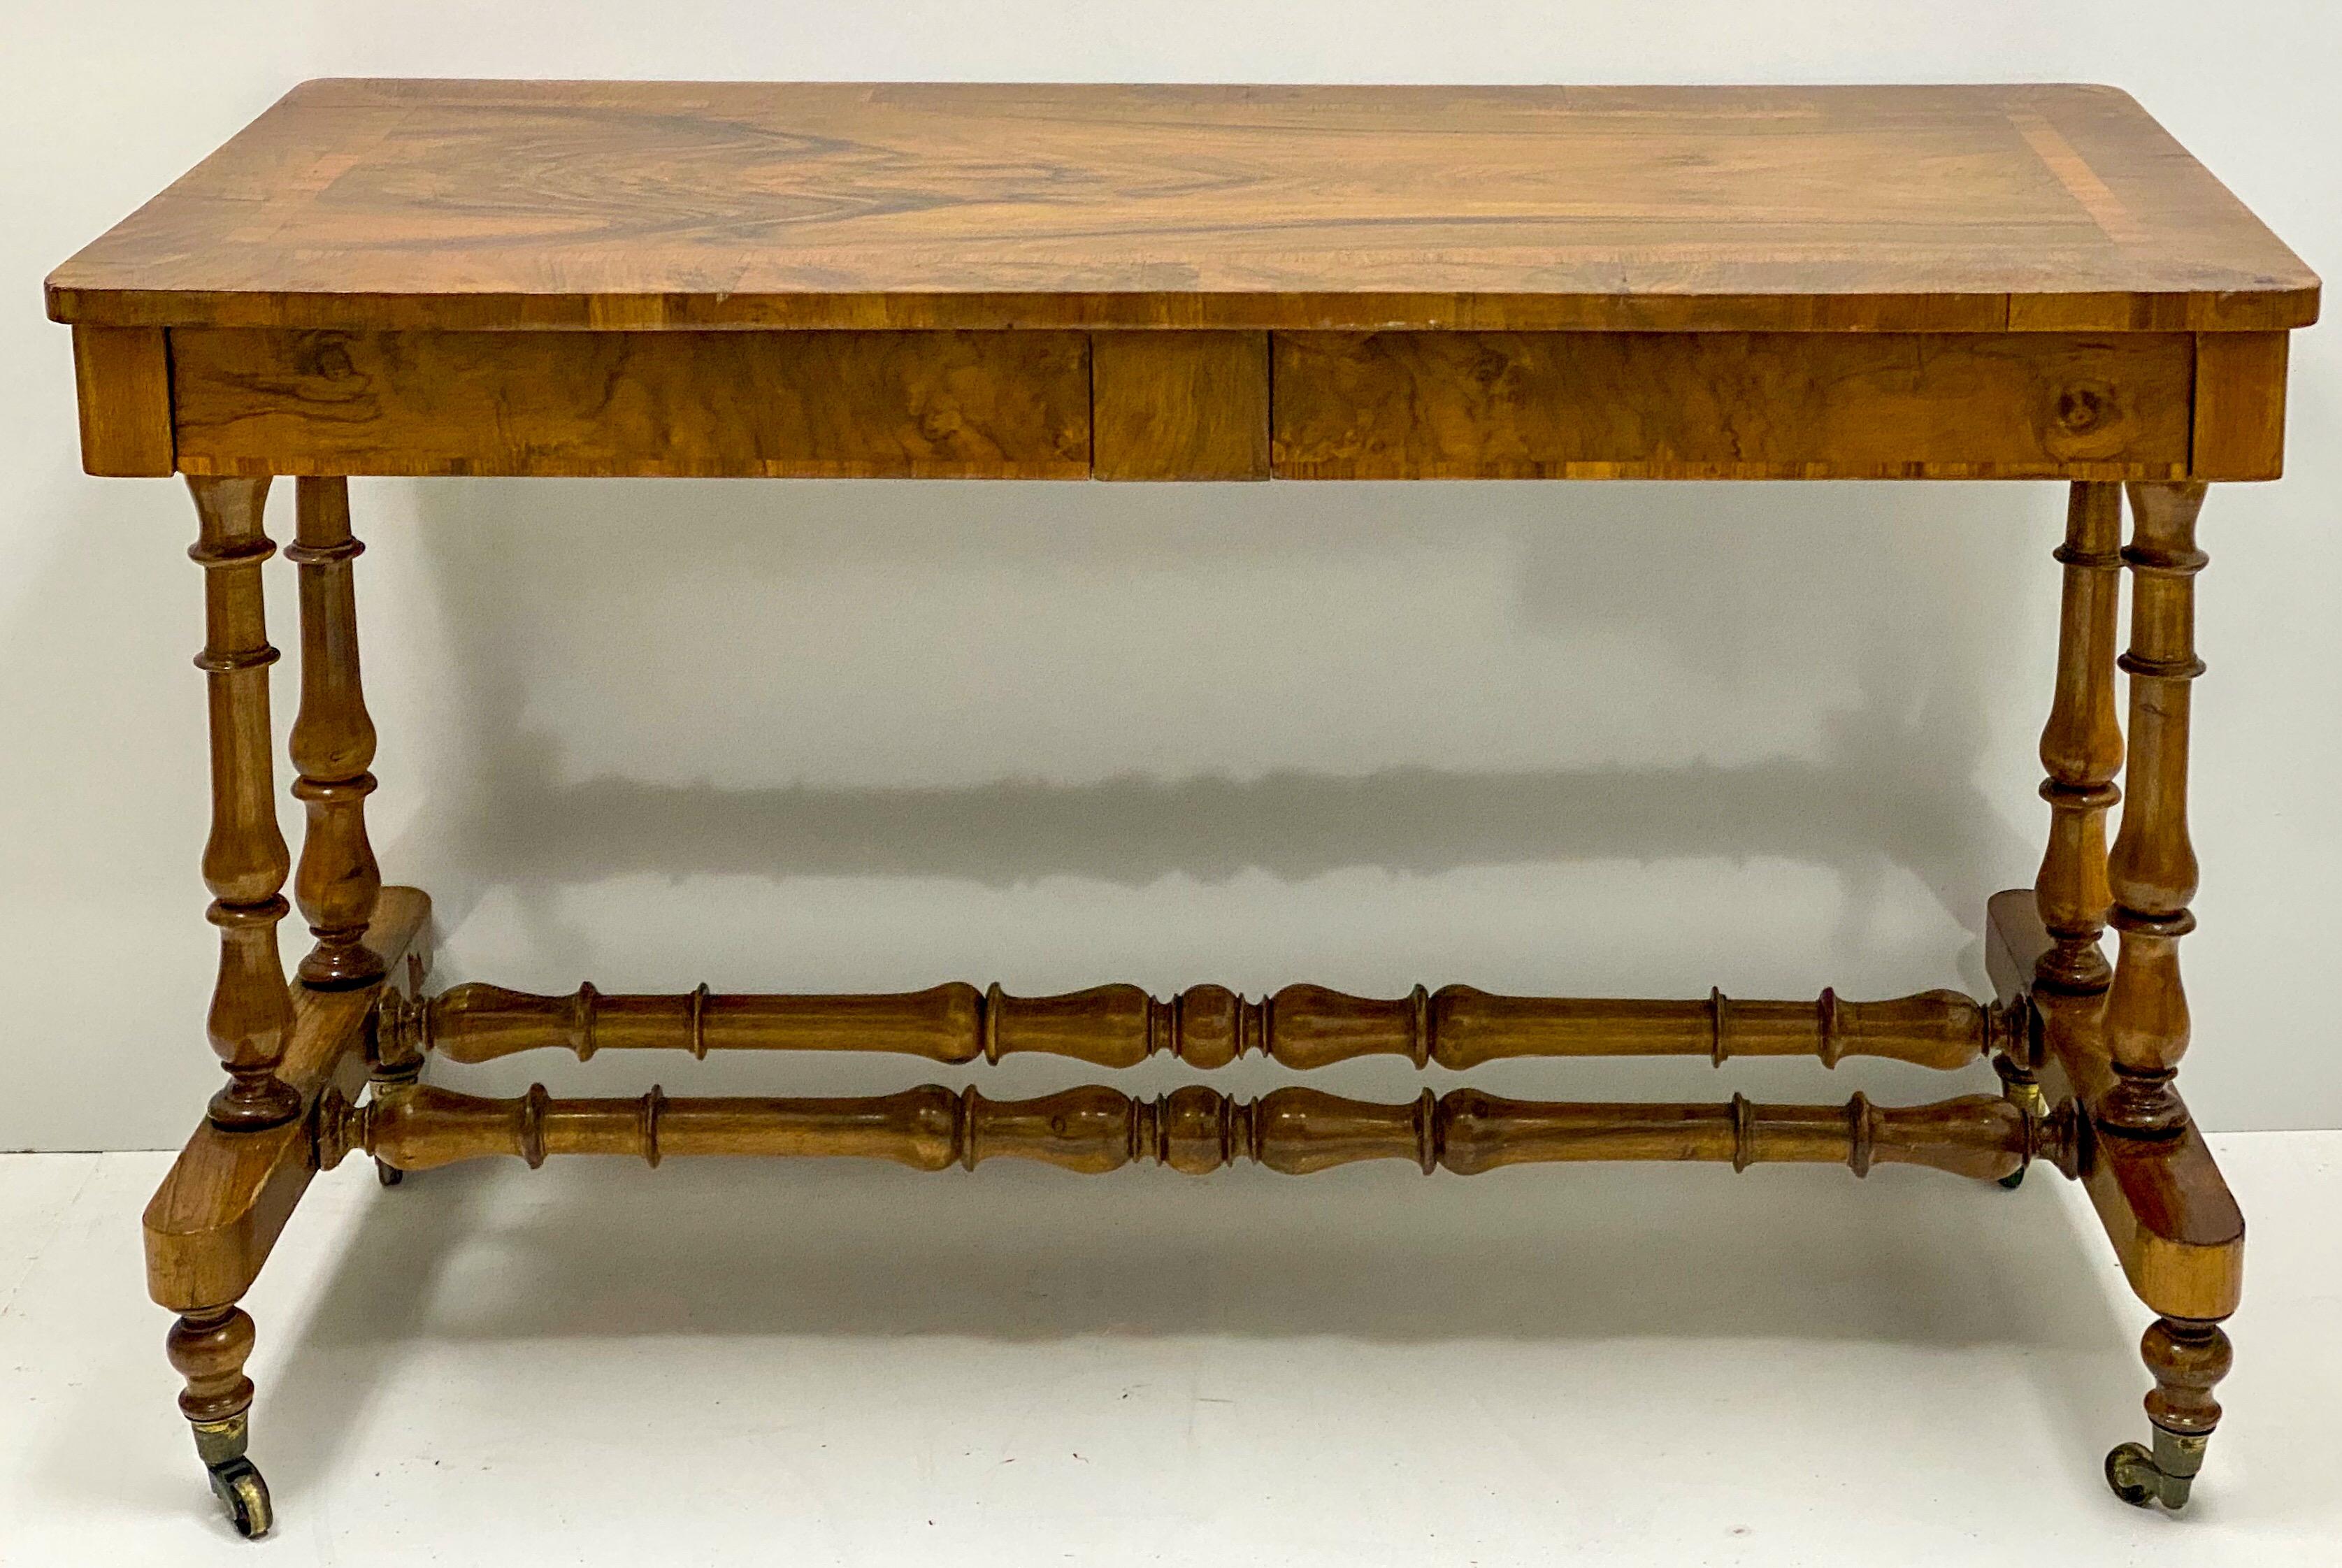 19th-C. English Carved Walnut Turned Leg Writing Desk Or Console Table 1